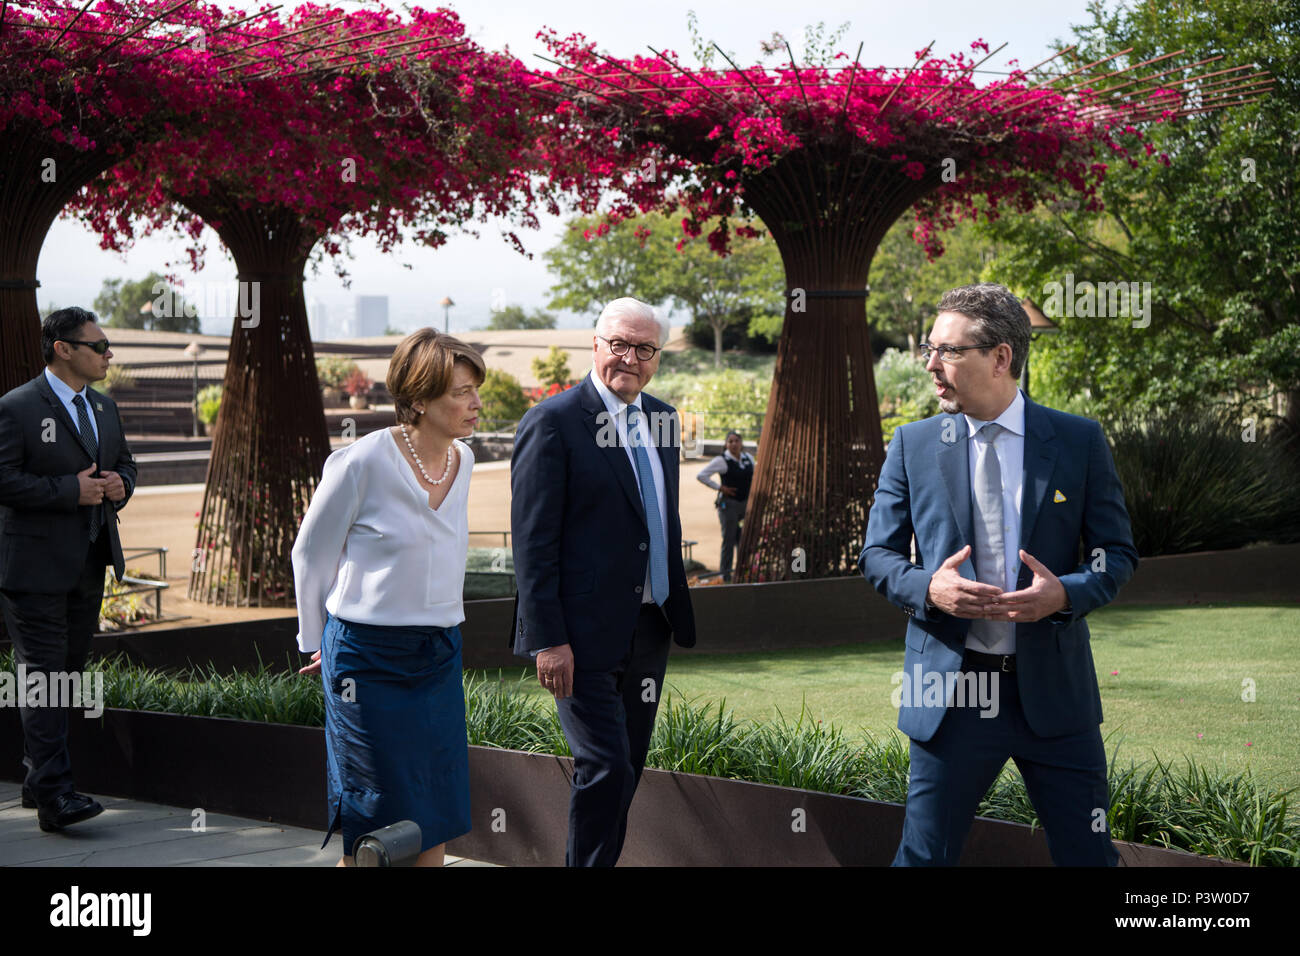 19 June 2018, USA, Los Angeles (California): German President Frank-Walter Steinmeier and his wife Elke Buedenbender, are guided through the complex and the garden of the Getty Museum by the deputy director of the Getty Research Institute, Andrew Perchuk (R). President Steinmeier and his wife are on a three day visit to California. Photo: Bernd von Jutrczenka/dpa Stock Photo